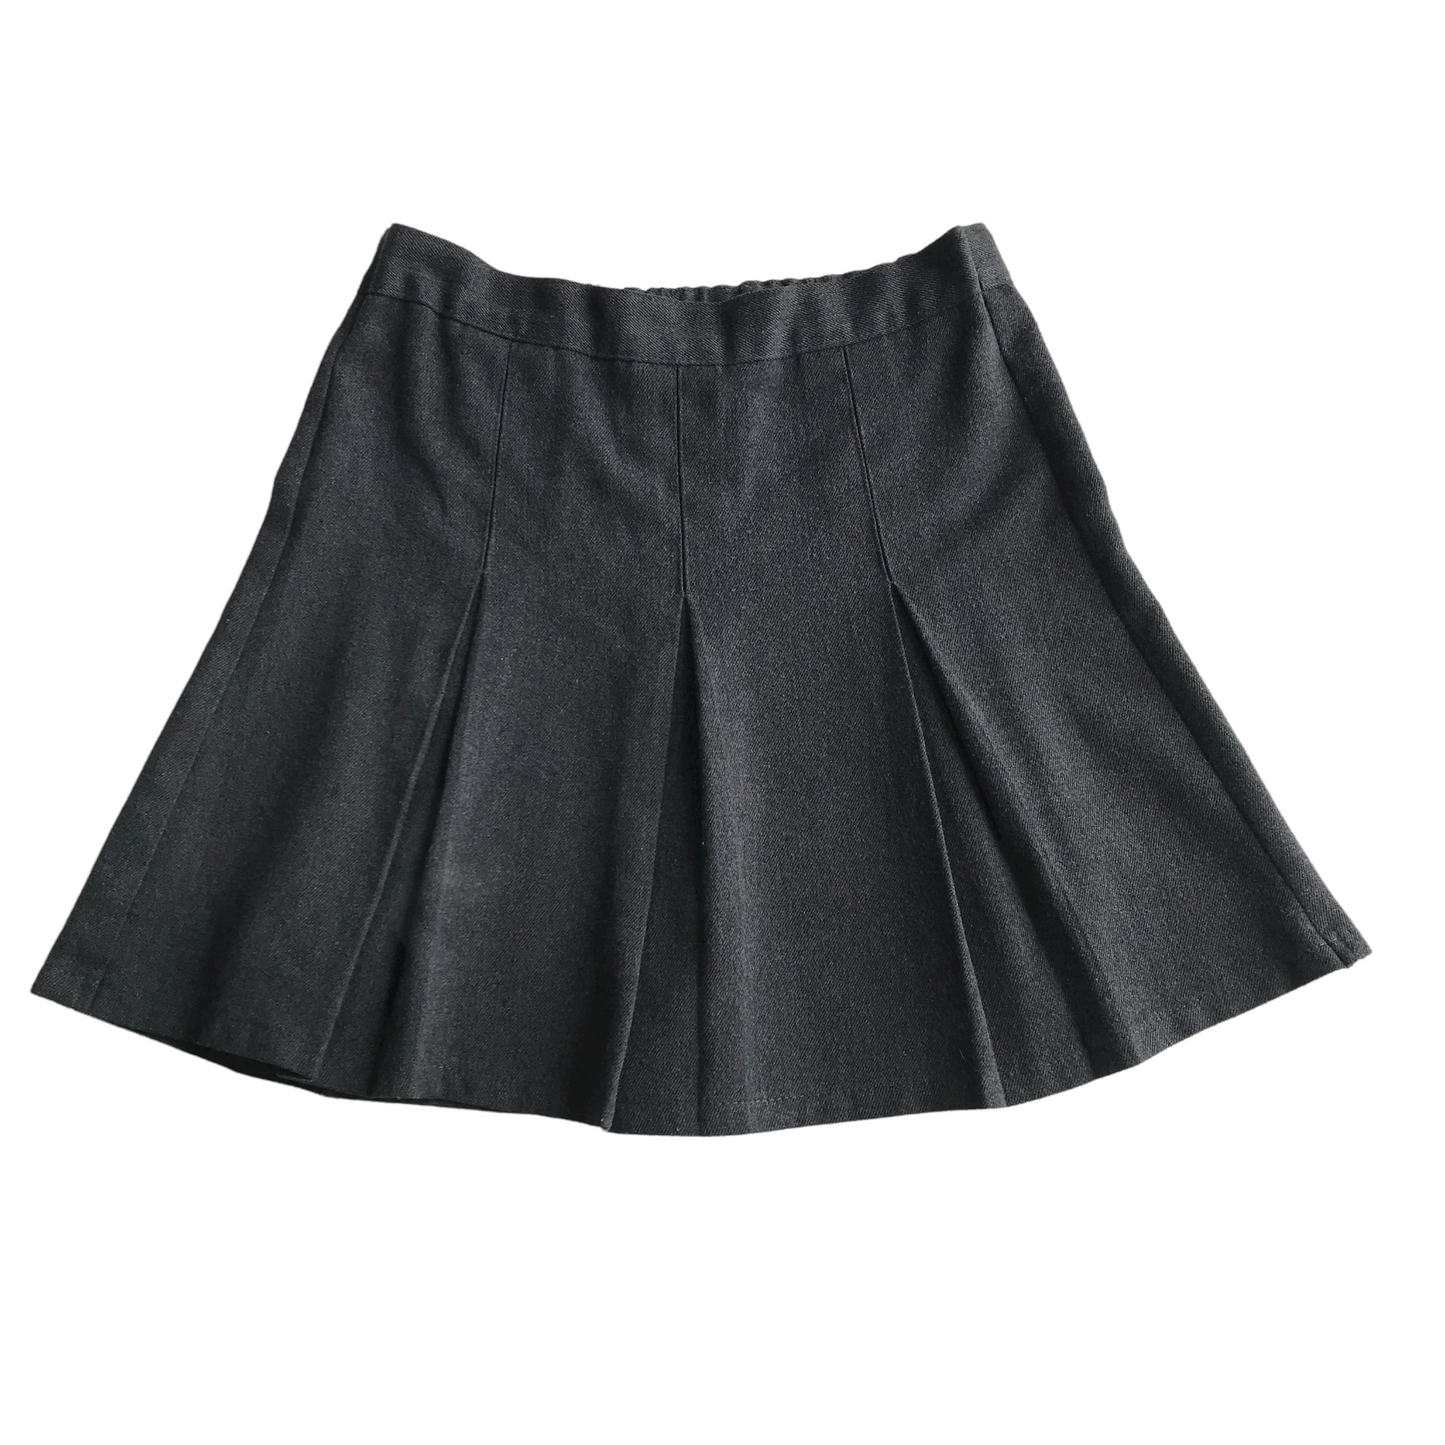 Grey School Skirt with Thin Waistband and pleats